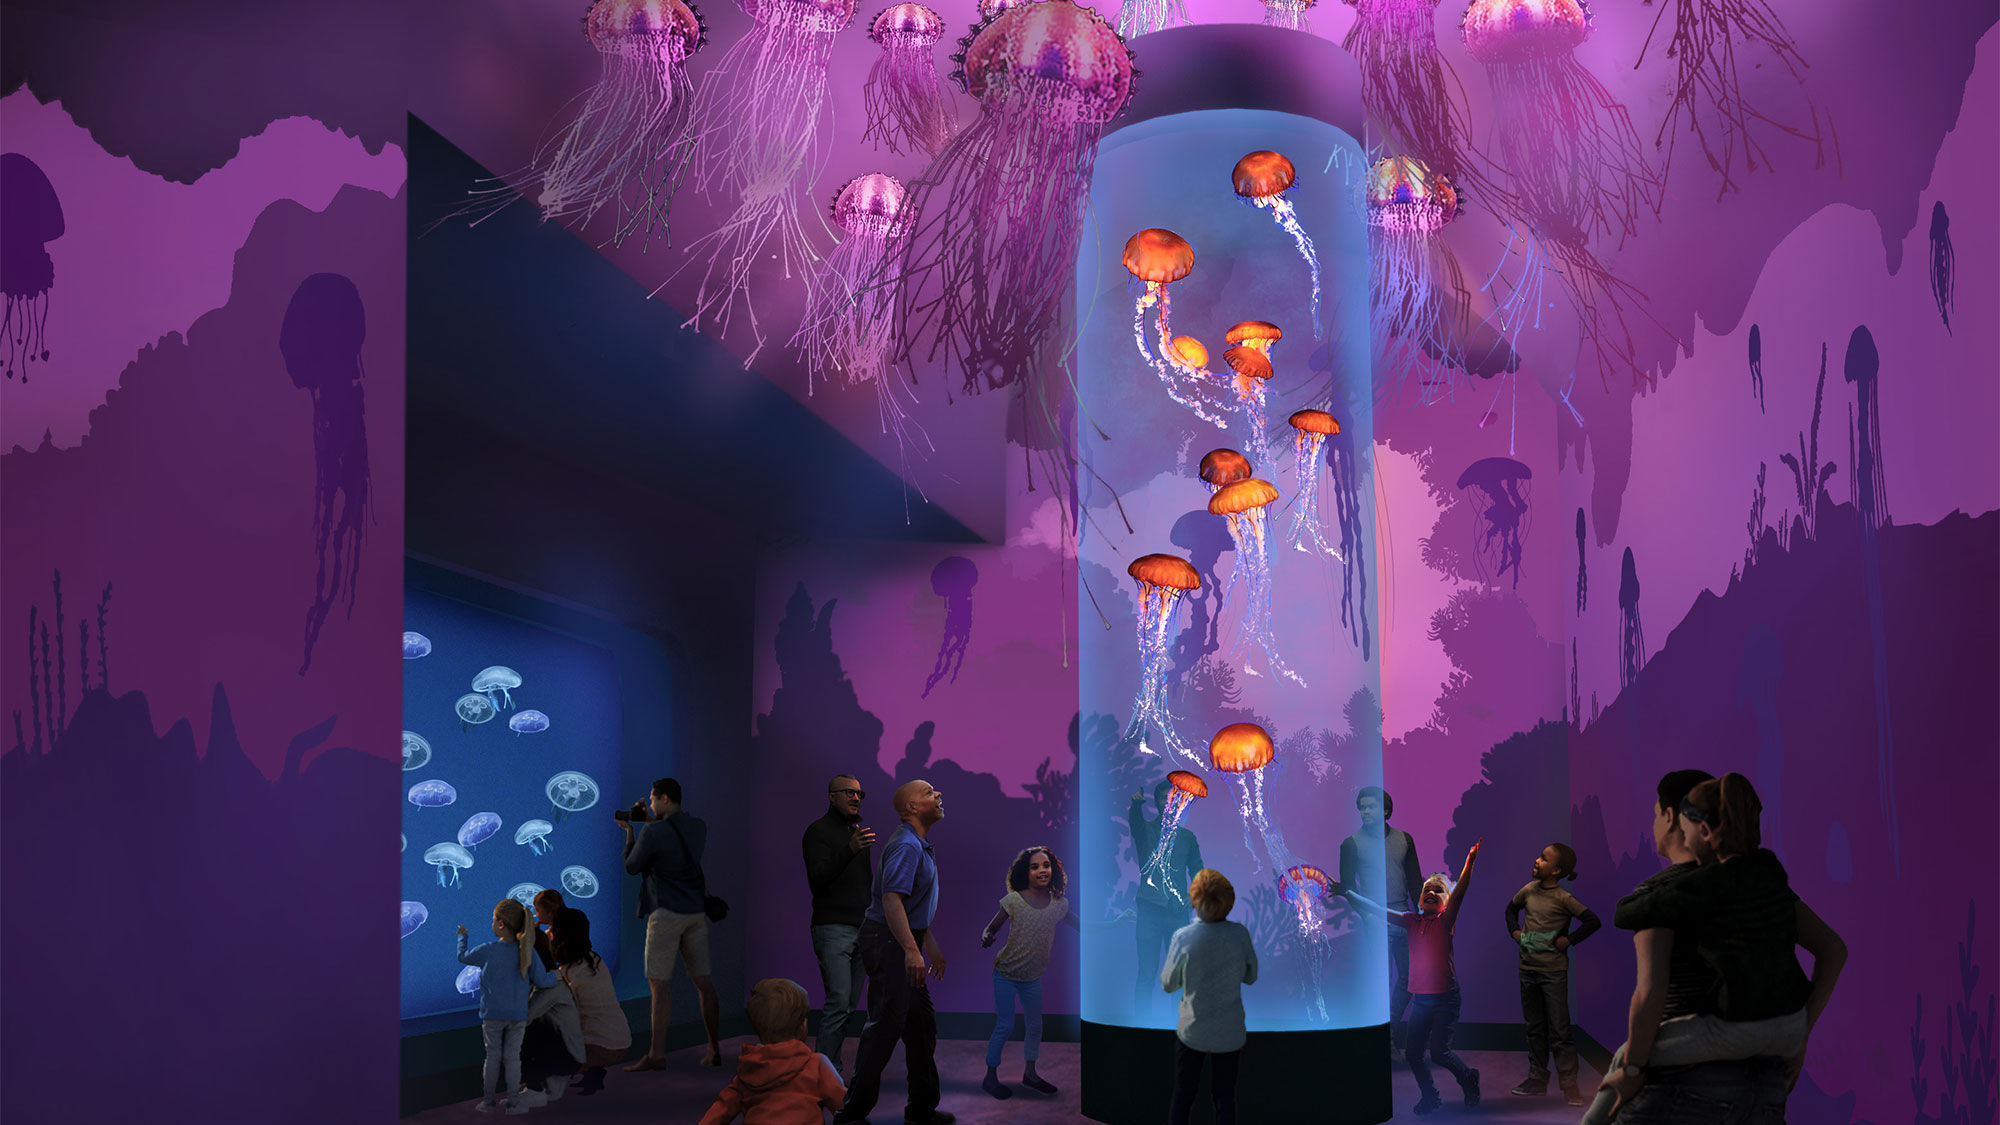 A rendering of Jewels of the Sea: The Jellyfish Experience, an interactive aquarium opening at SeaWorld San Diego next year.